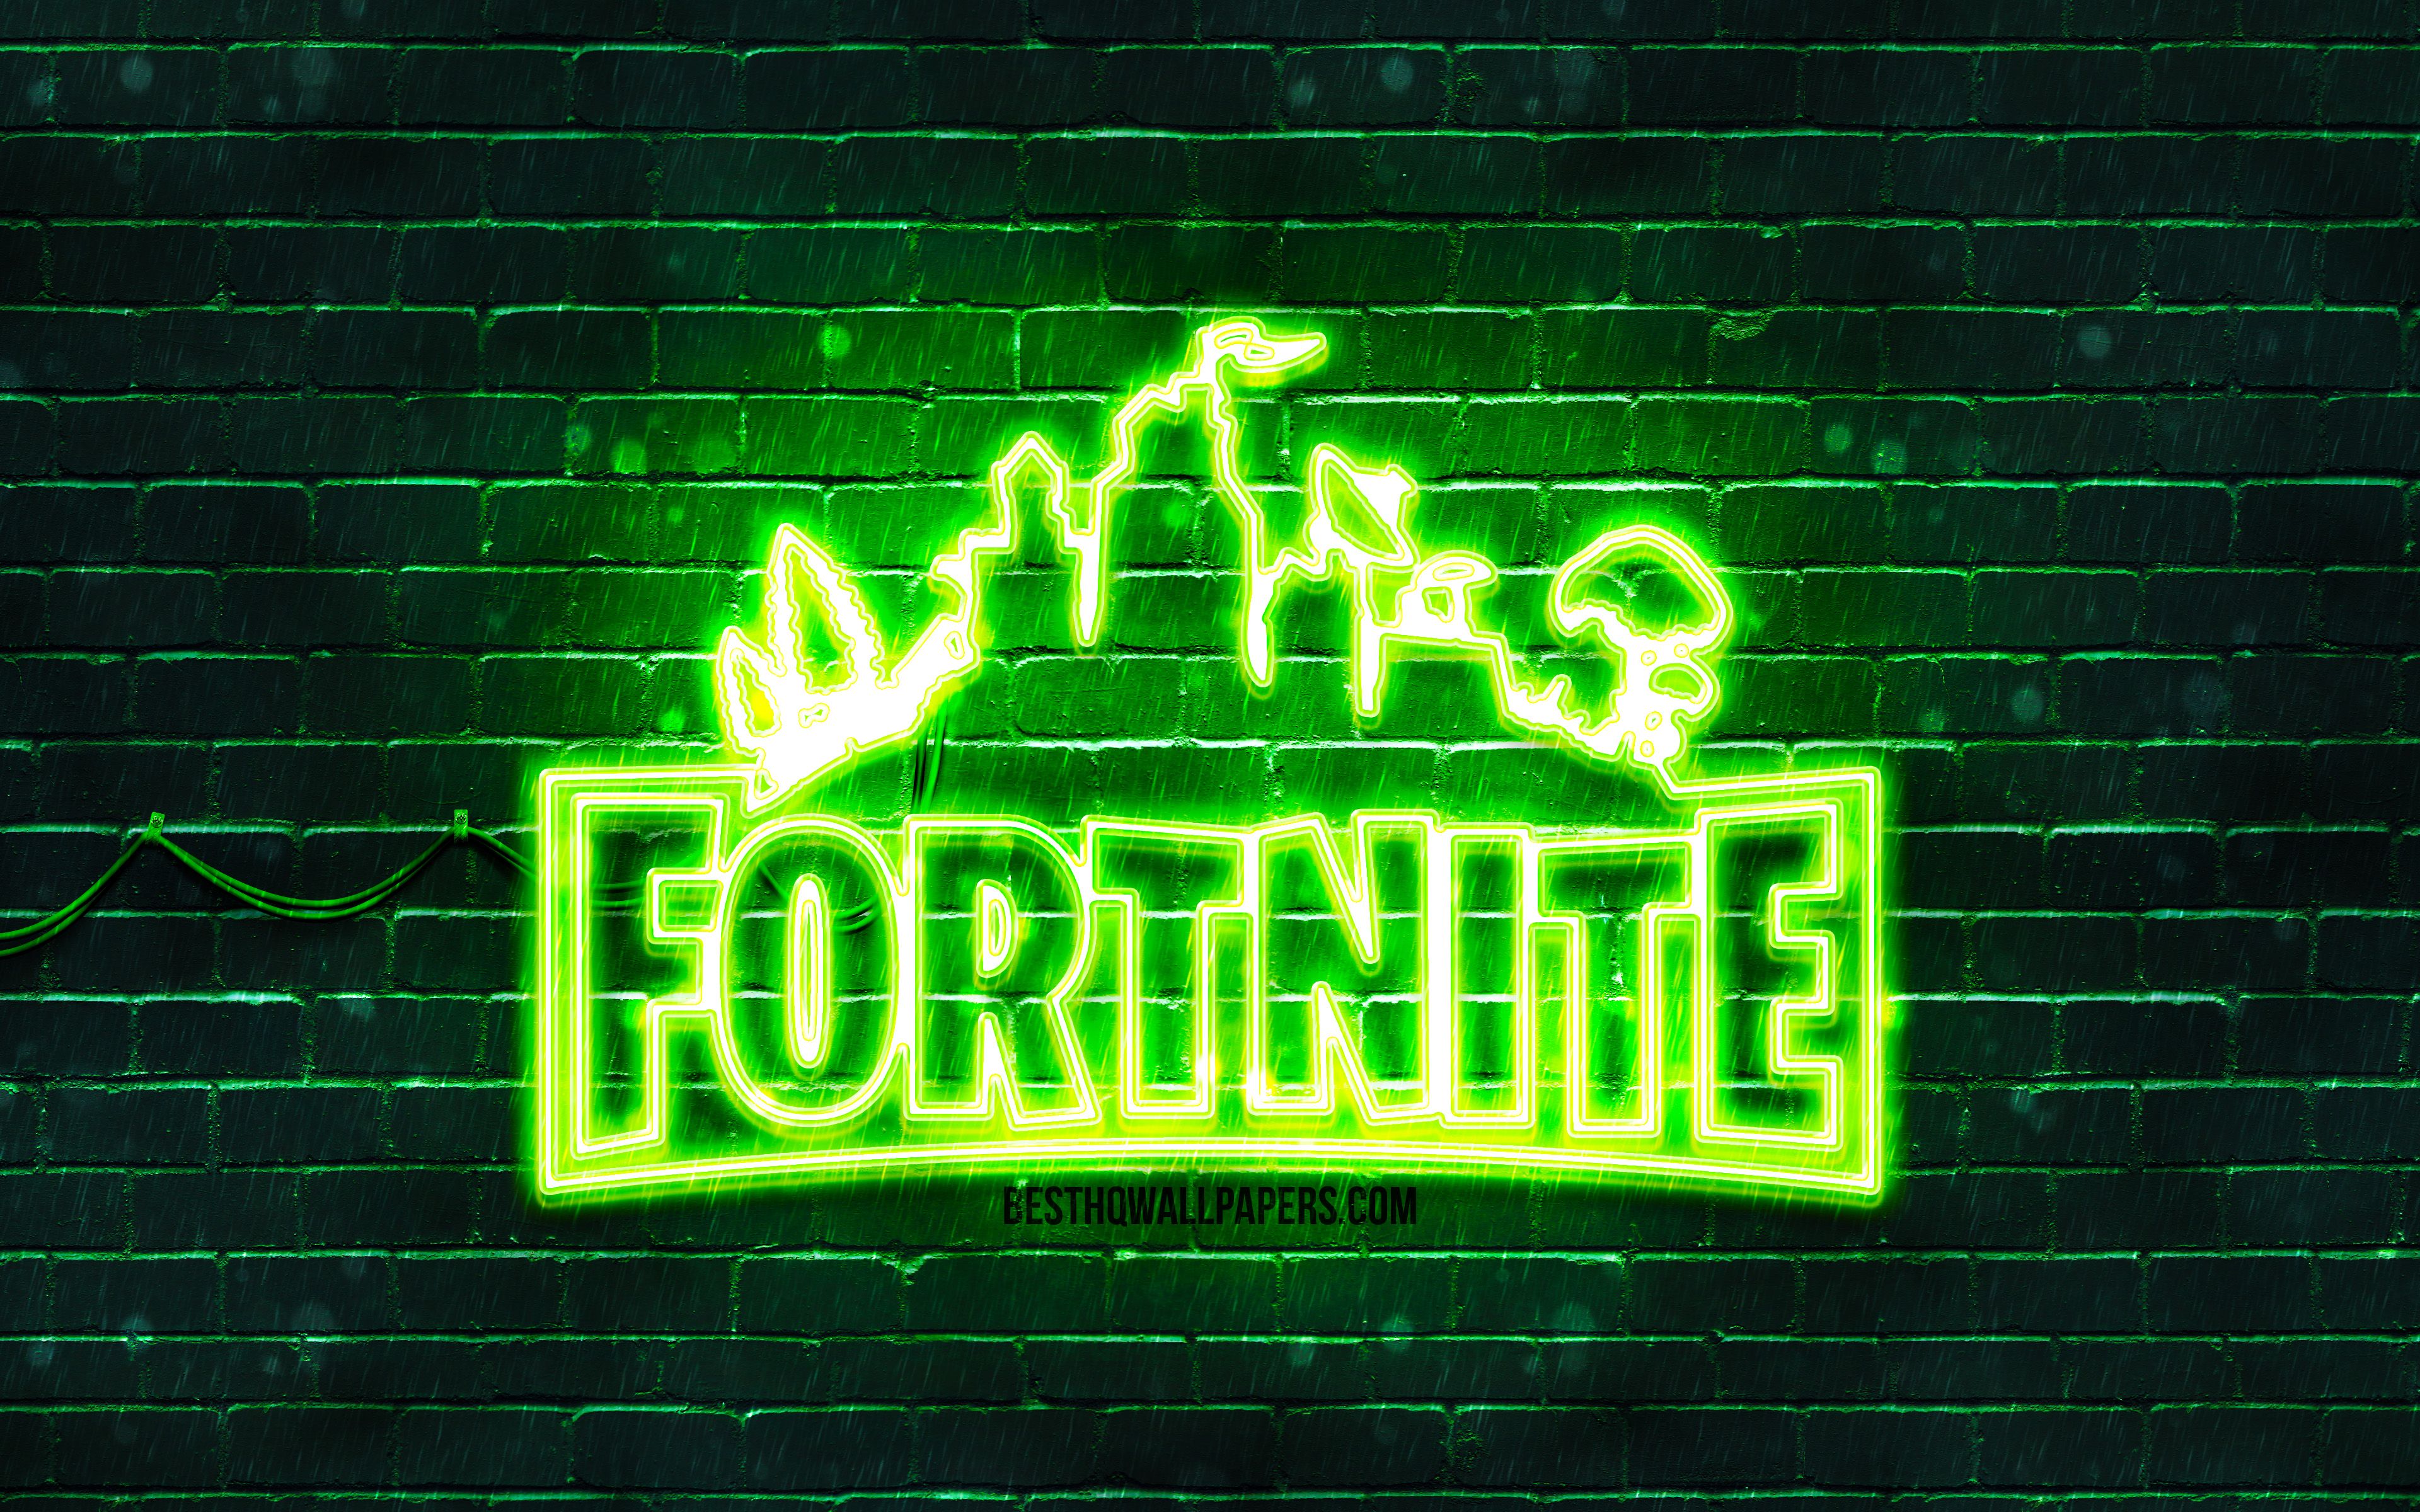 Download wallpaper Fortnite green logo, 4k, green brickwall, Fortnite logo, 2020 games, Fortnite neon logo, Fortnite for desktop with resolution 3840x2400. High Quality HD picture wallpaper